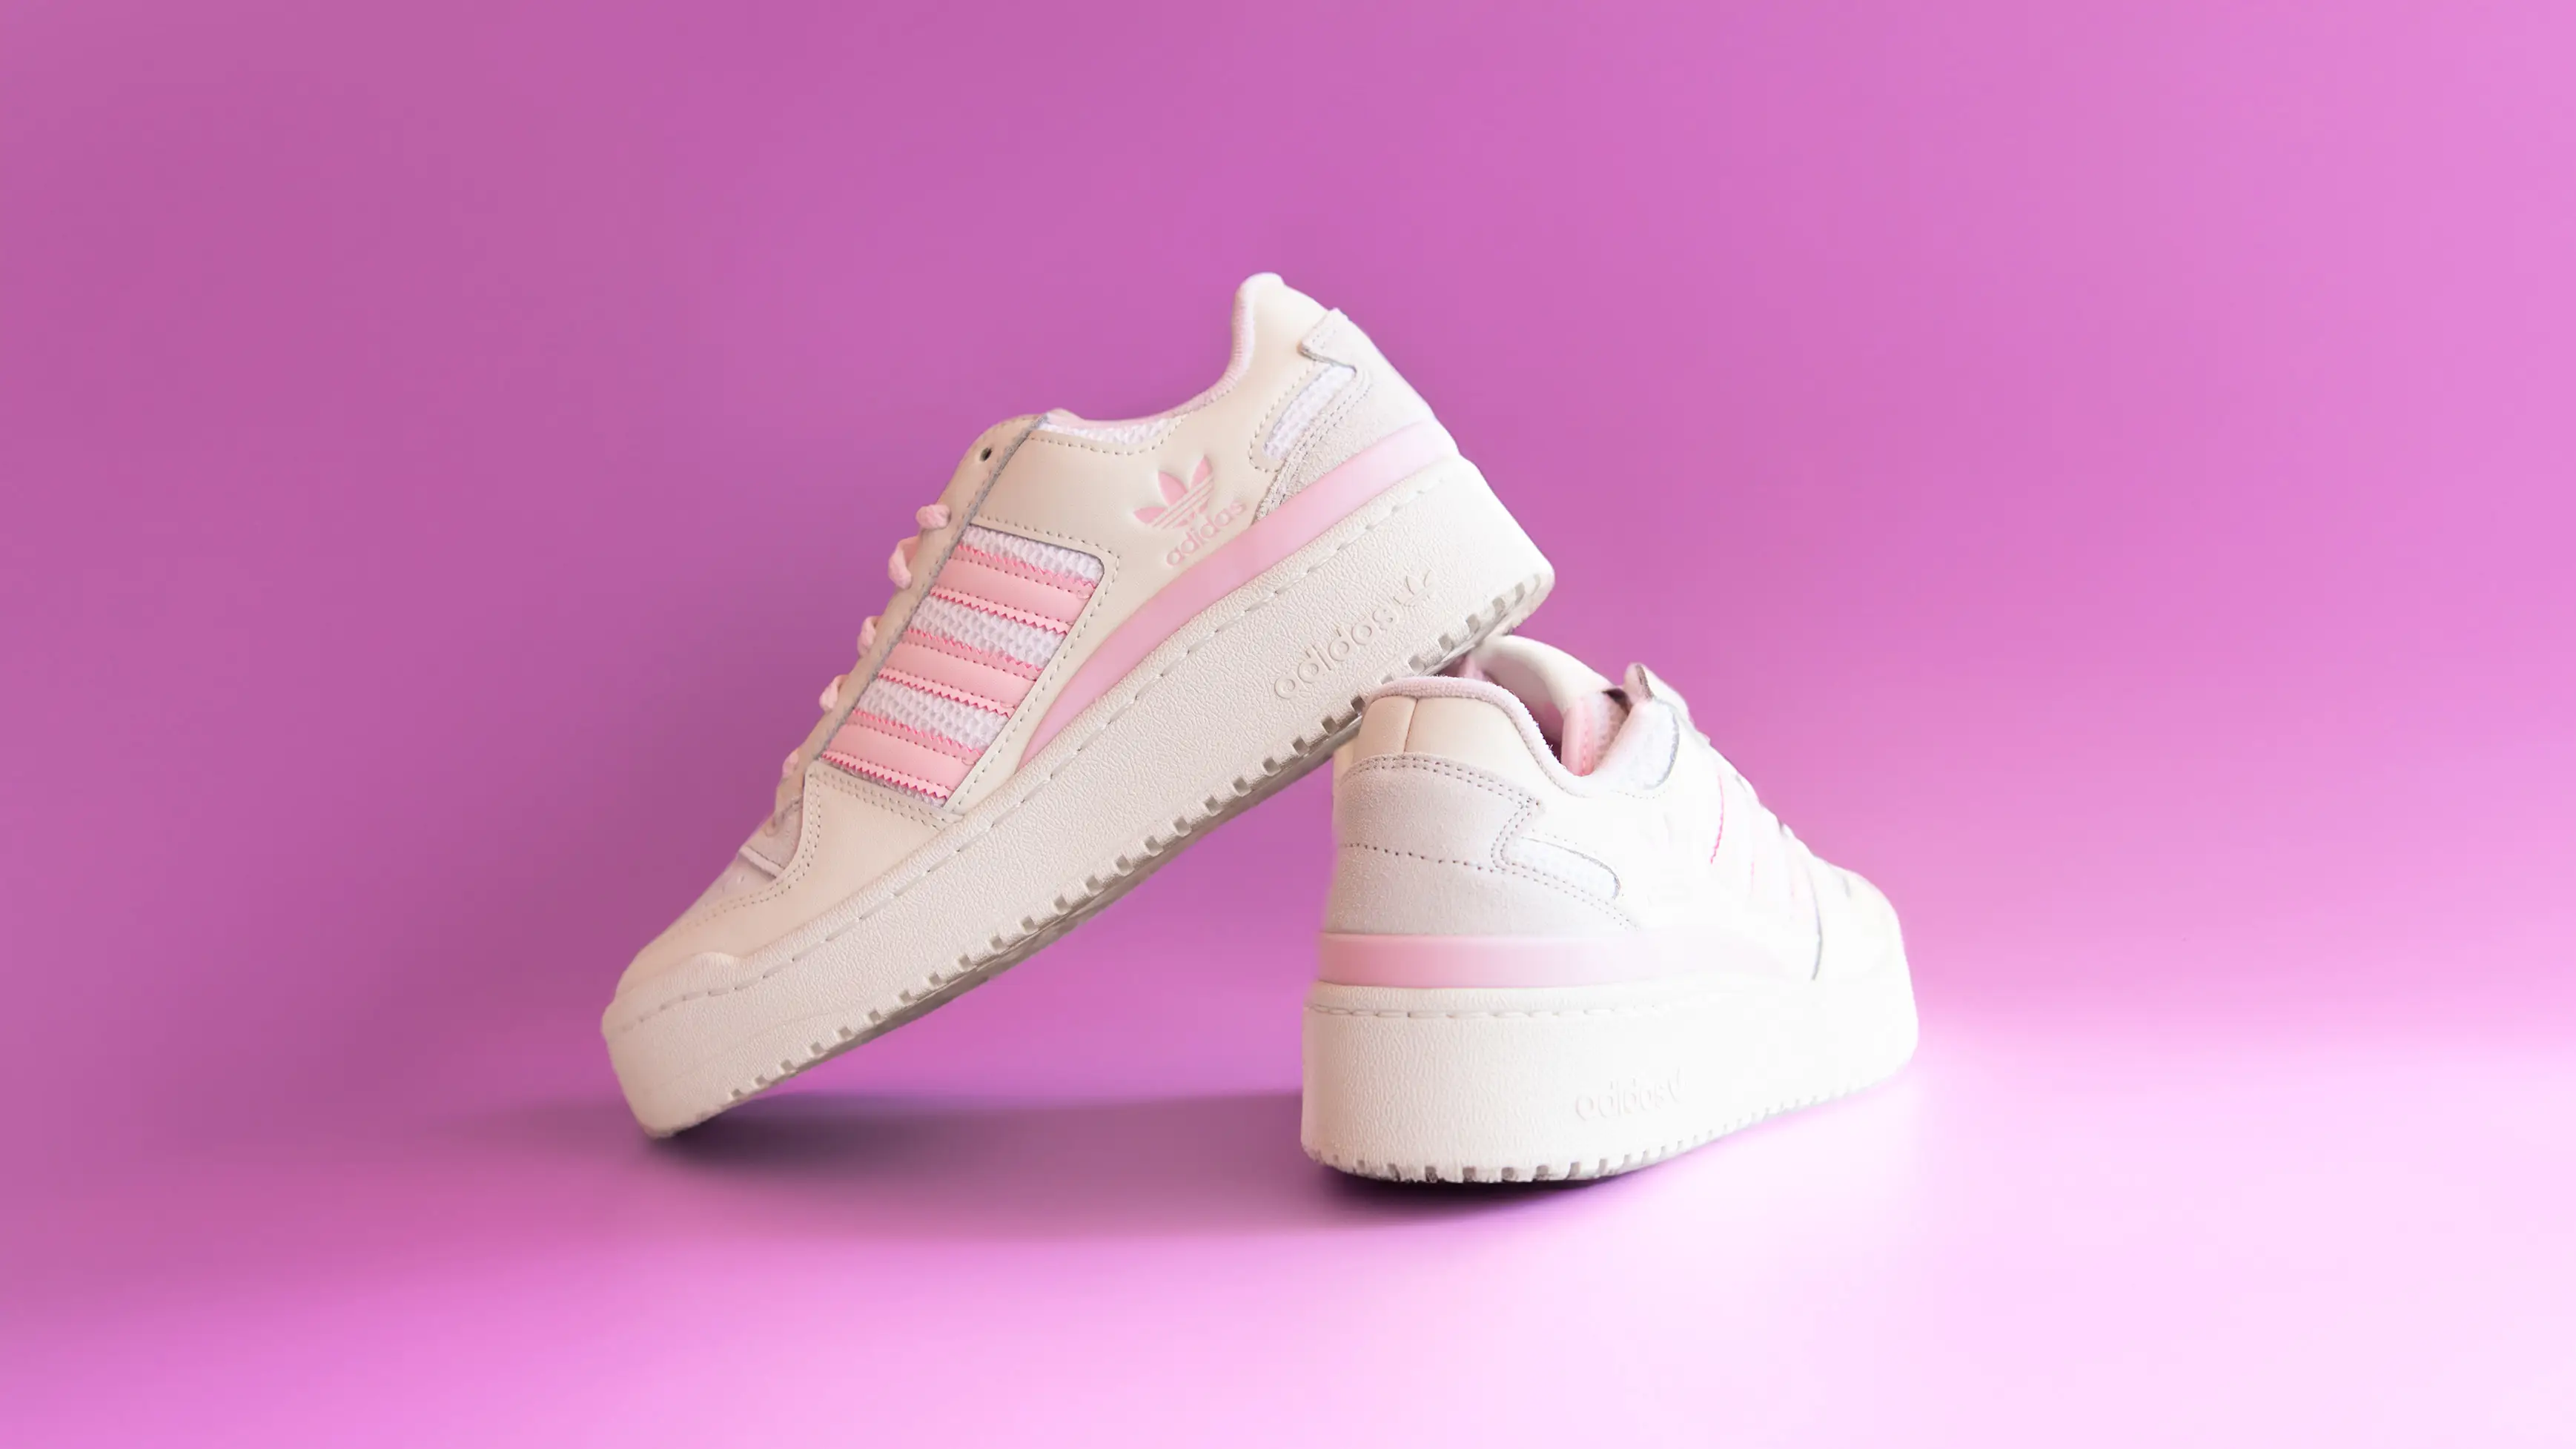 adidas gazelle cutout w lady on facebook cover Continues With This Cream & Pink adidas Forum Bold